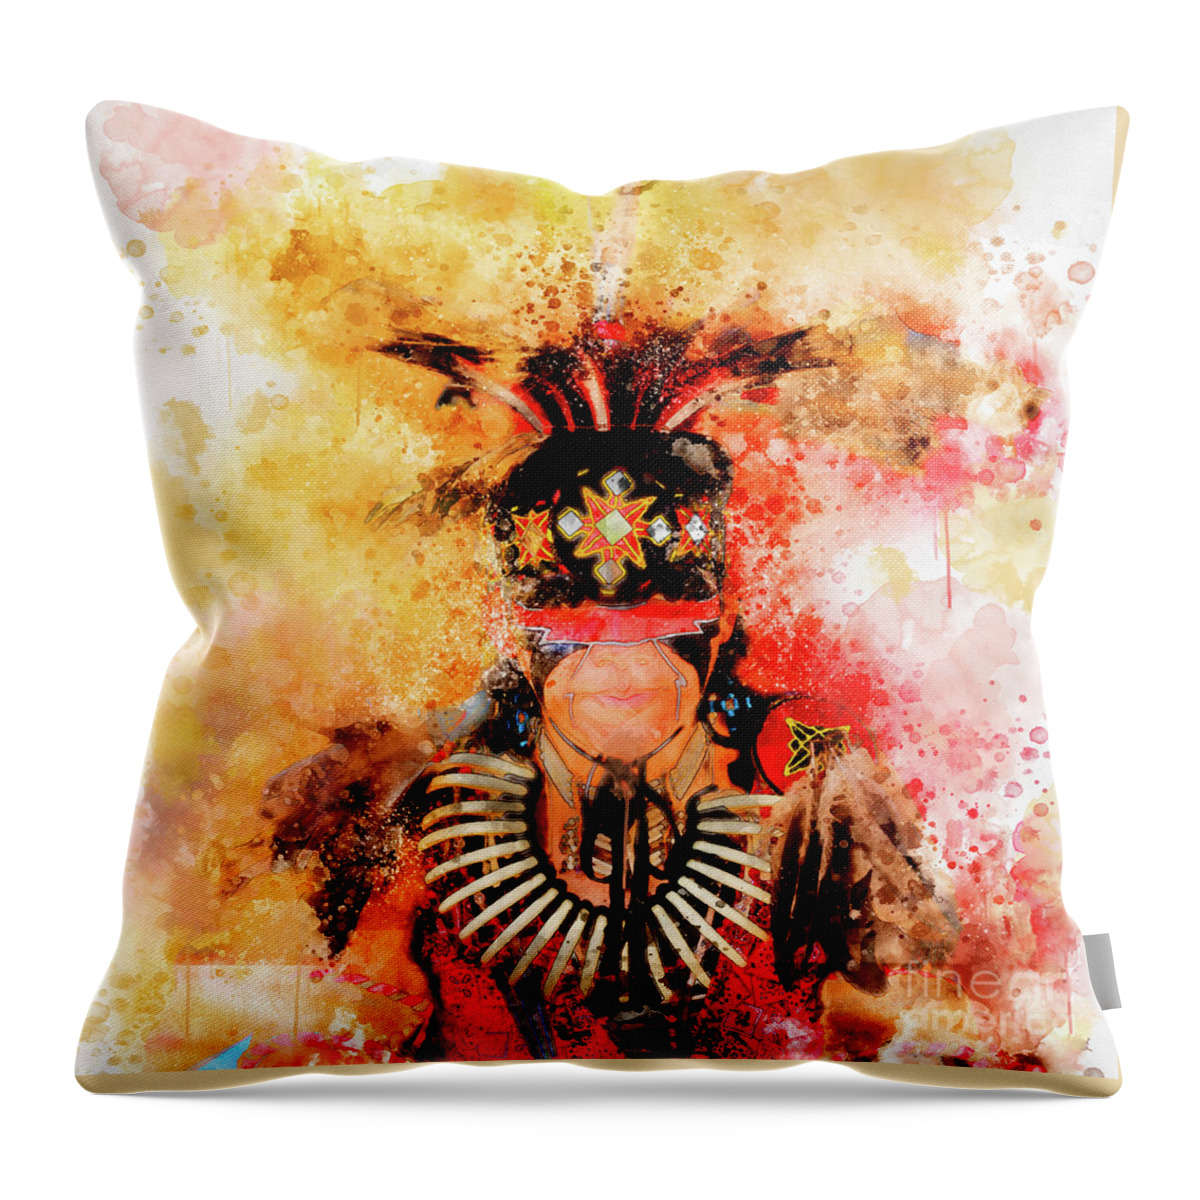 Pow Wow Throw Pillow featuring the painting Pow Wow #2 by Jim Hatch